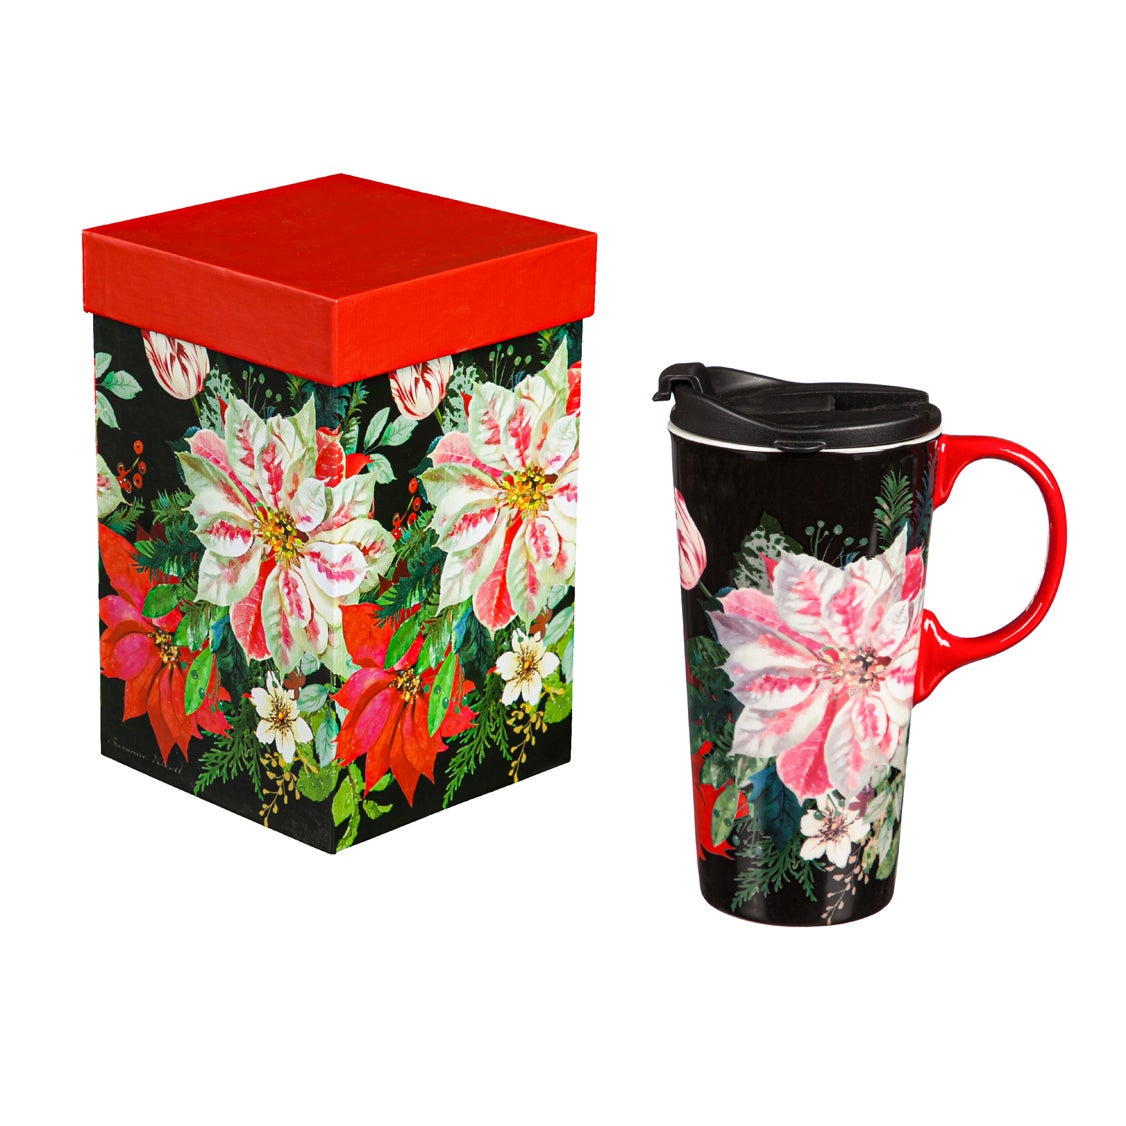 Ceramic Travel Cup with box, 17 Oz, Lush Christmas Florals